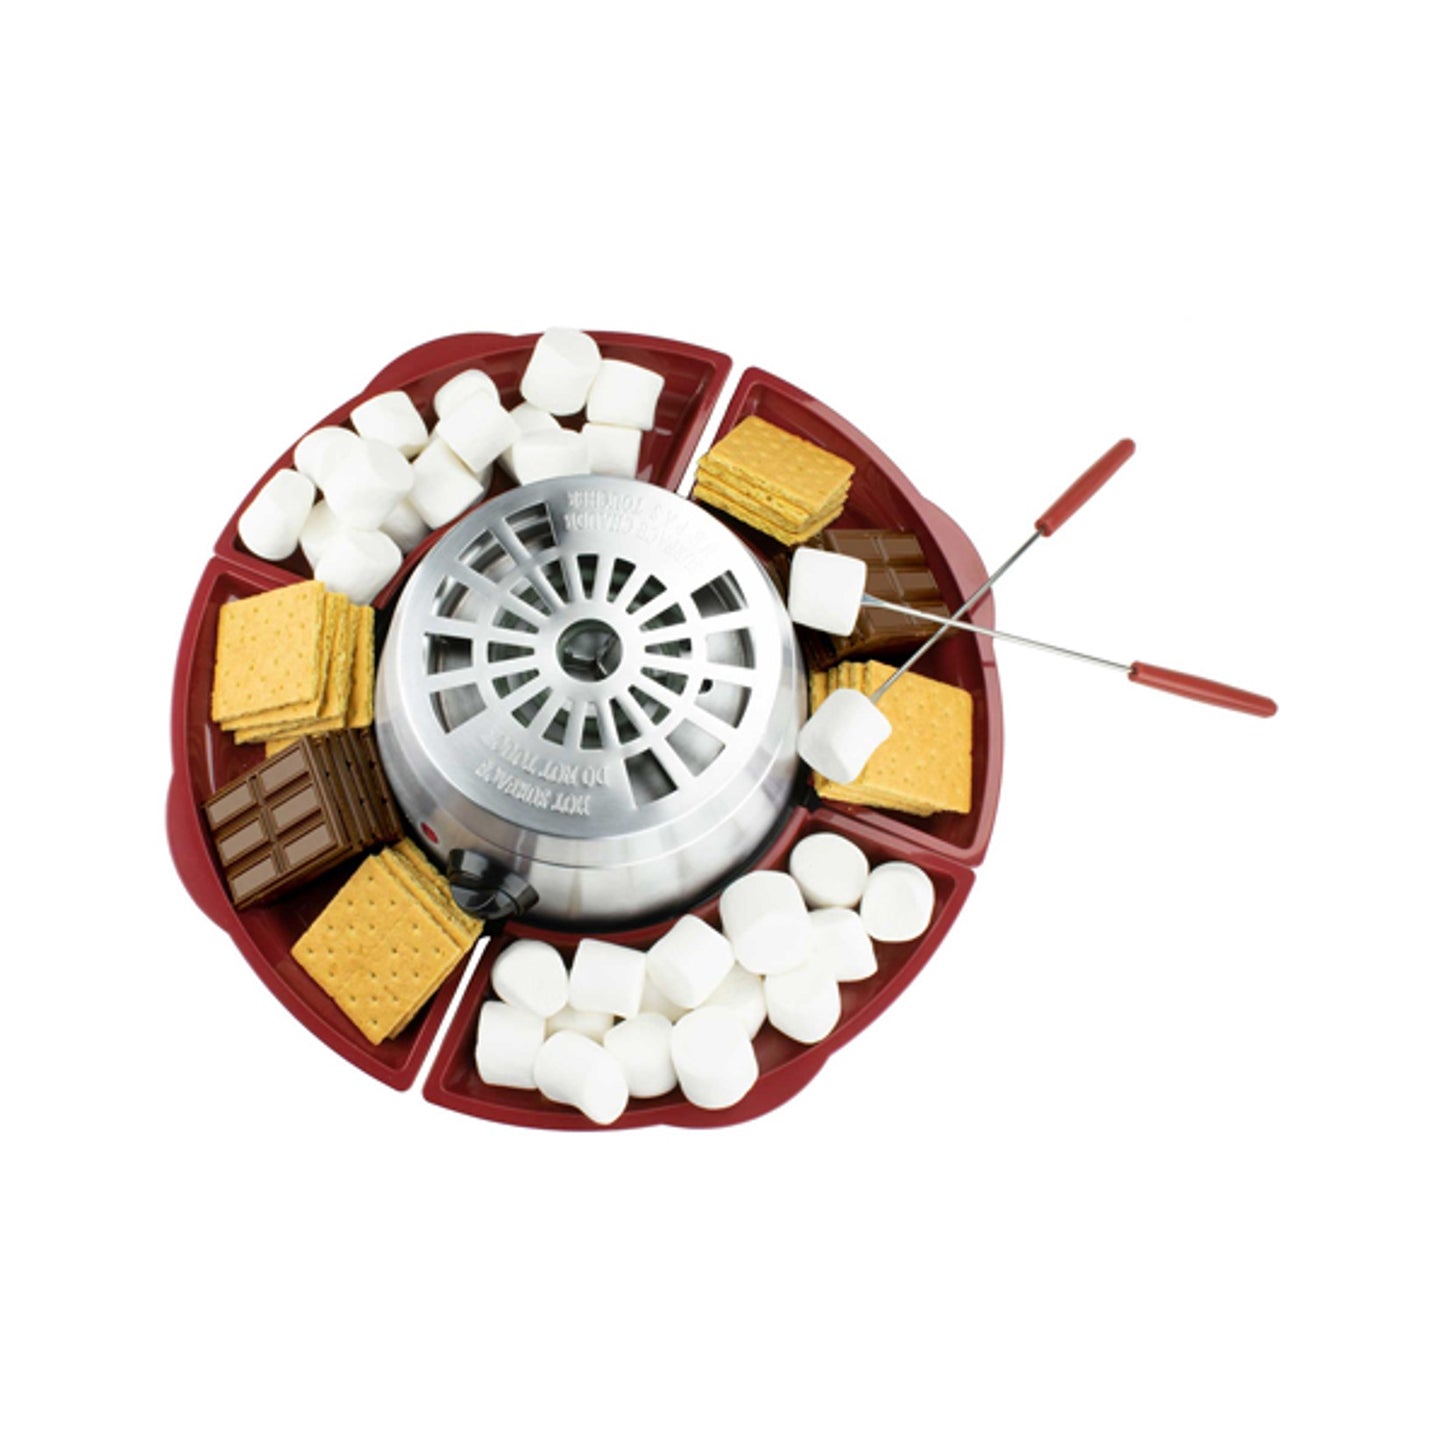 Brentwood Electric Smores Maker